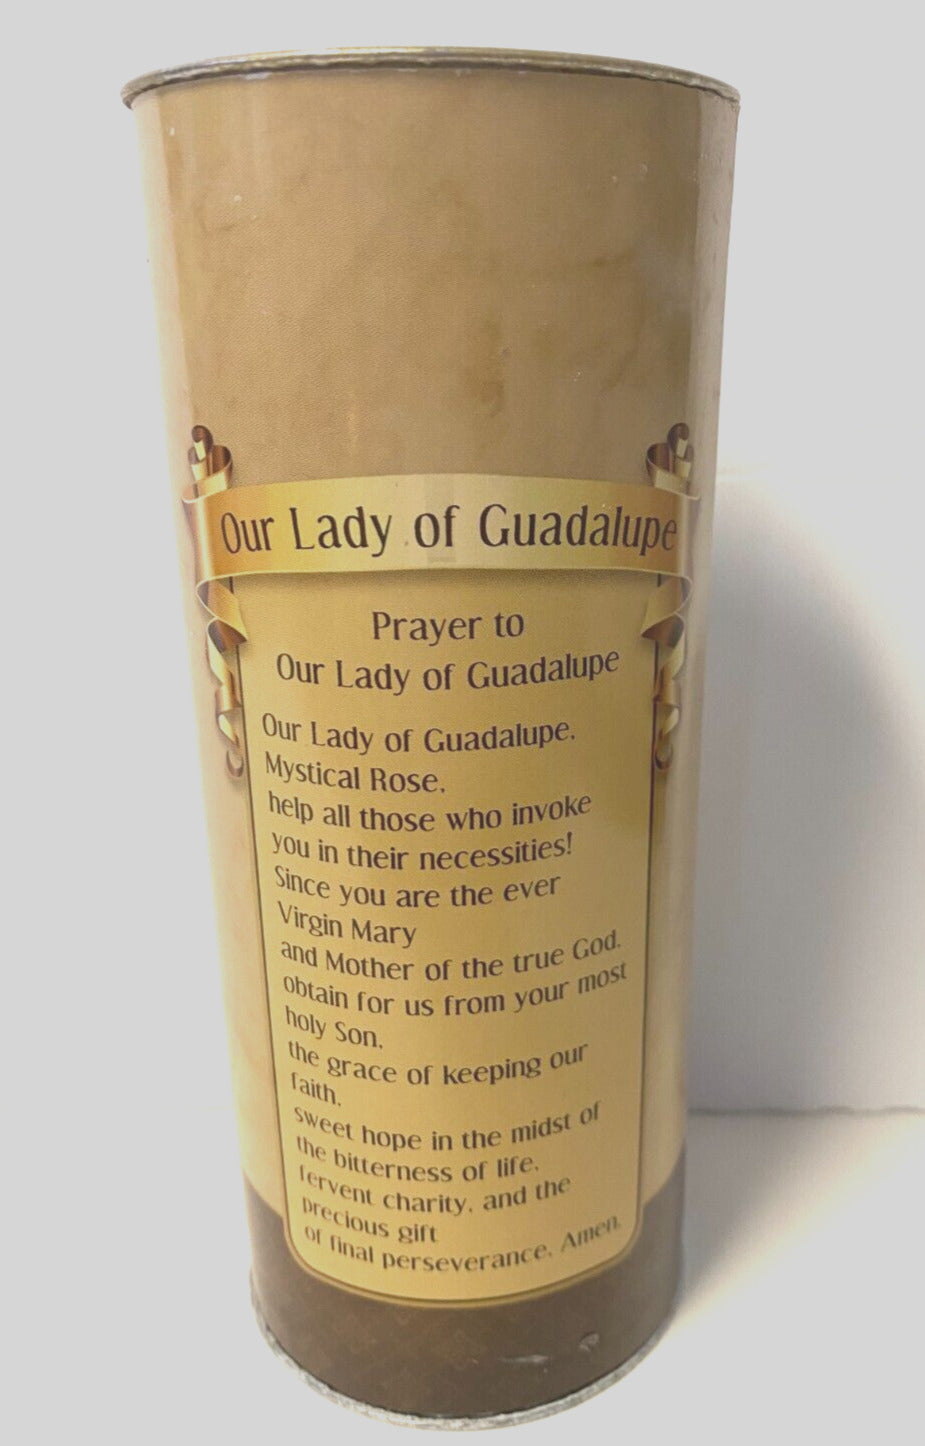 Our Lady of Guadalupe 5.75" Devotional Candle, New - Bob and Penny Lord